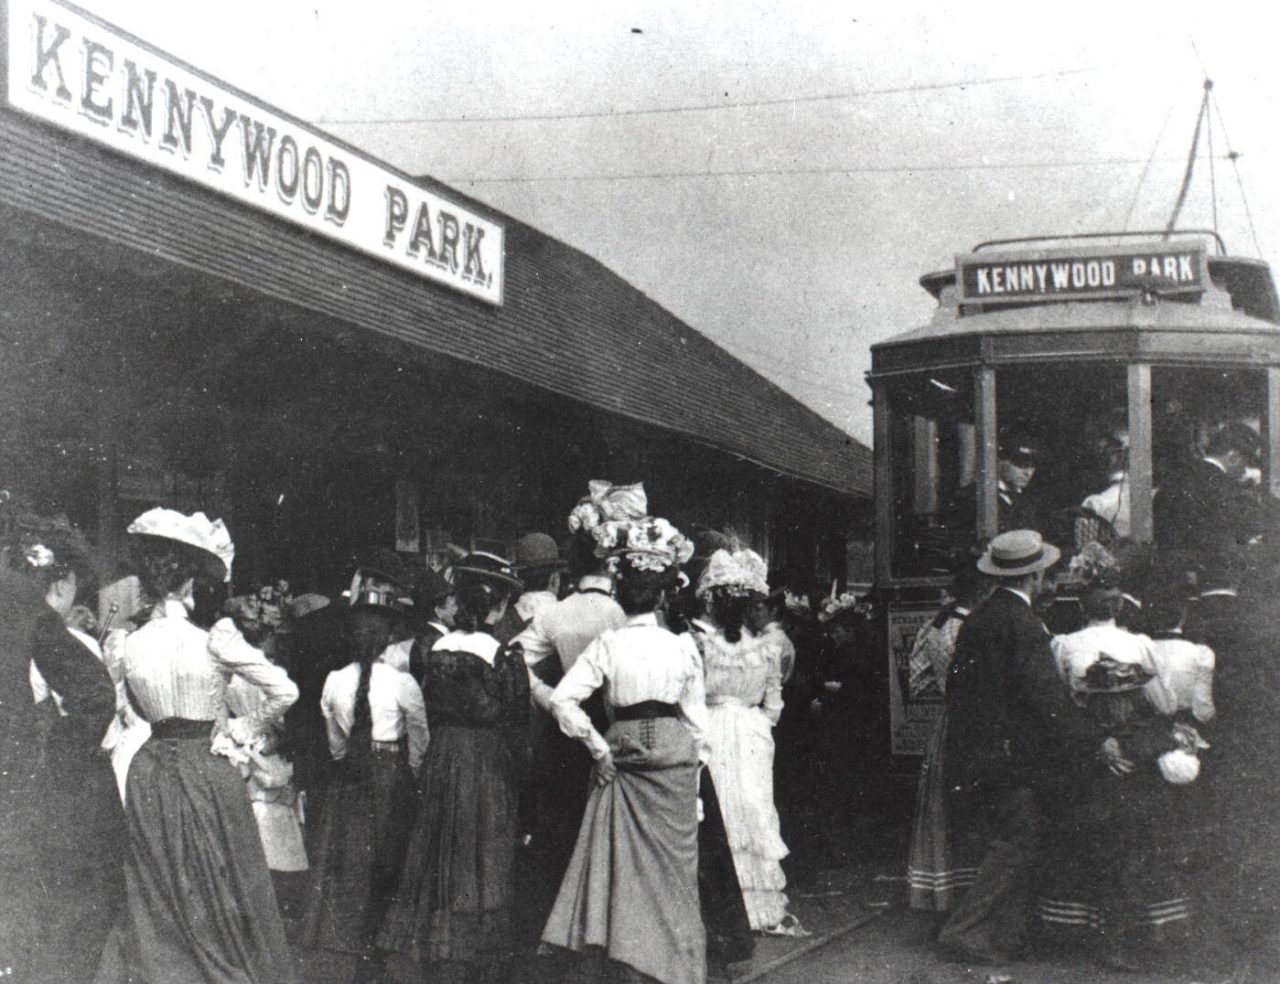 Passengers disembark on a trolley to visit the all-new Kennywood Park, circa 1900.